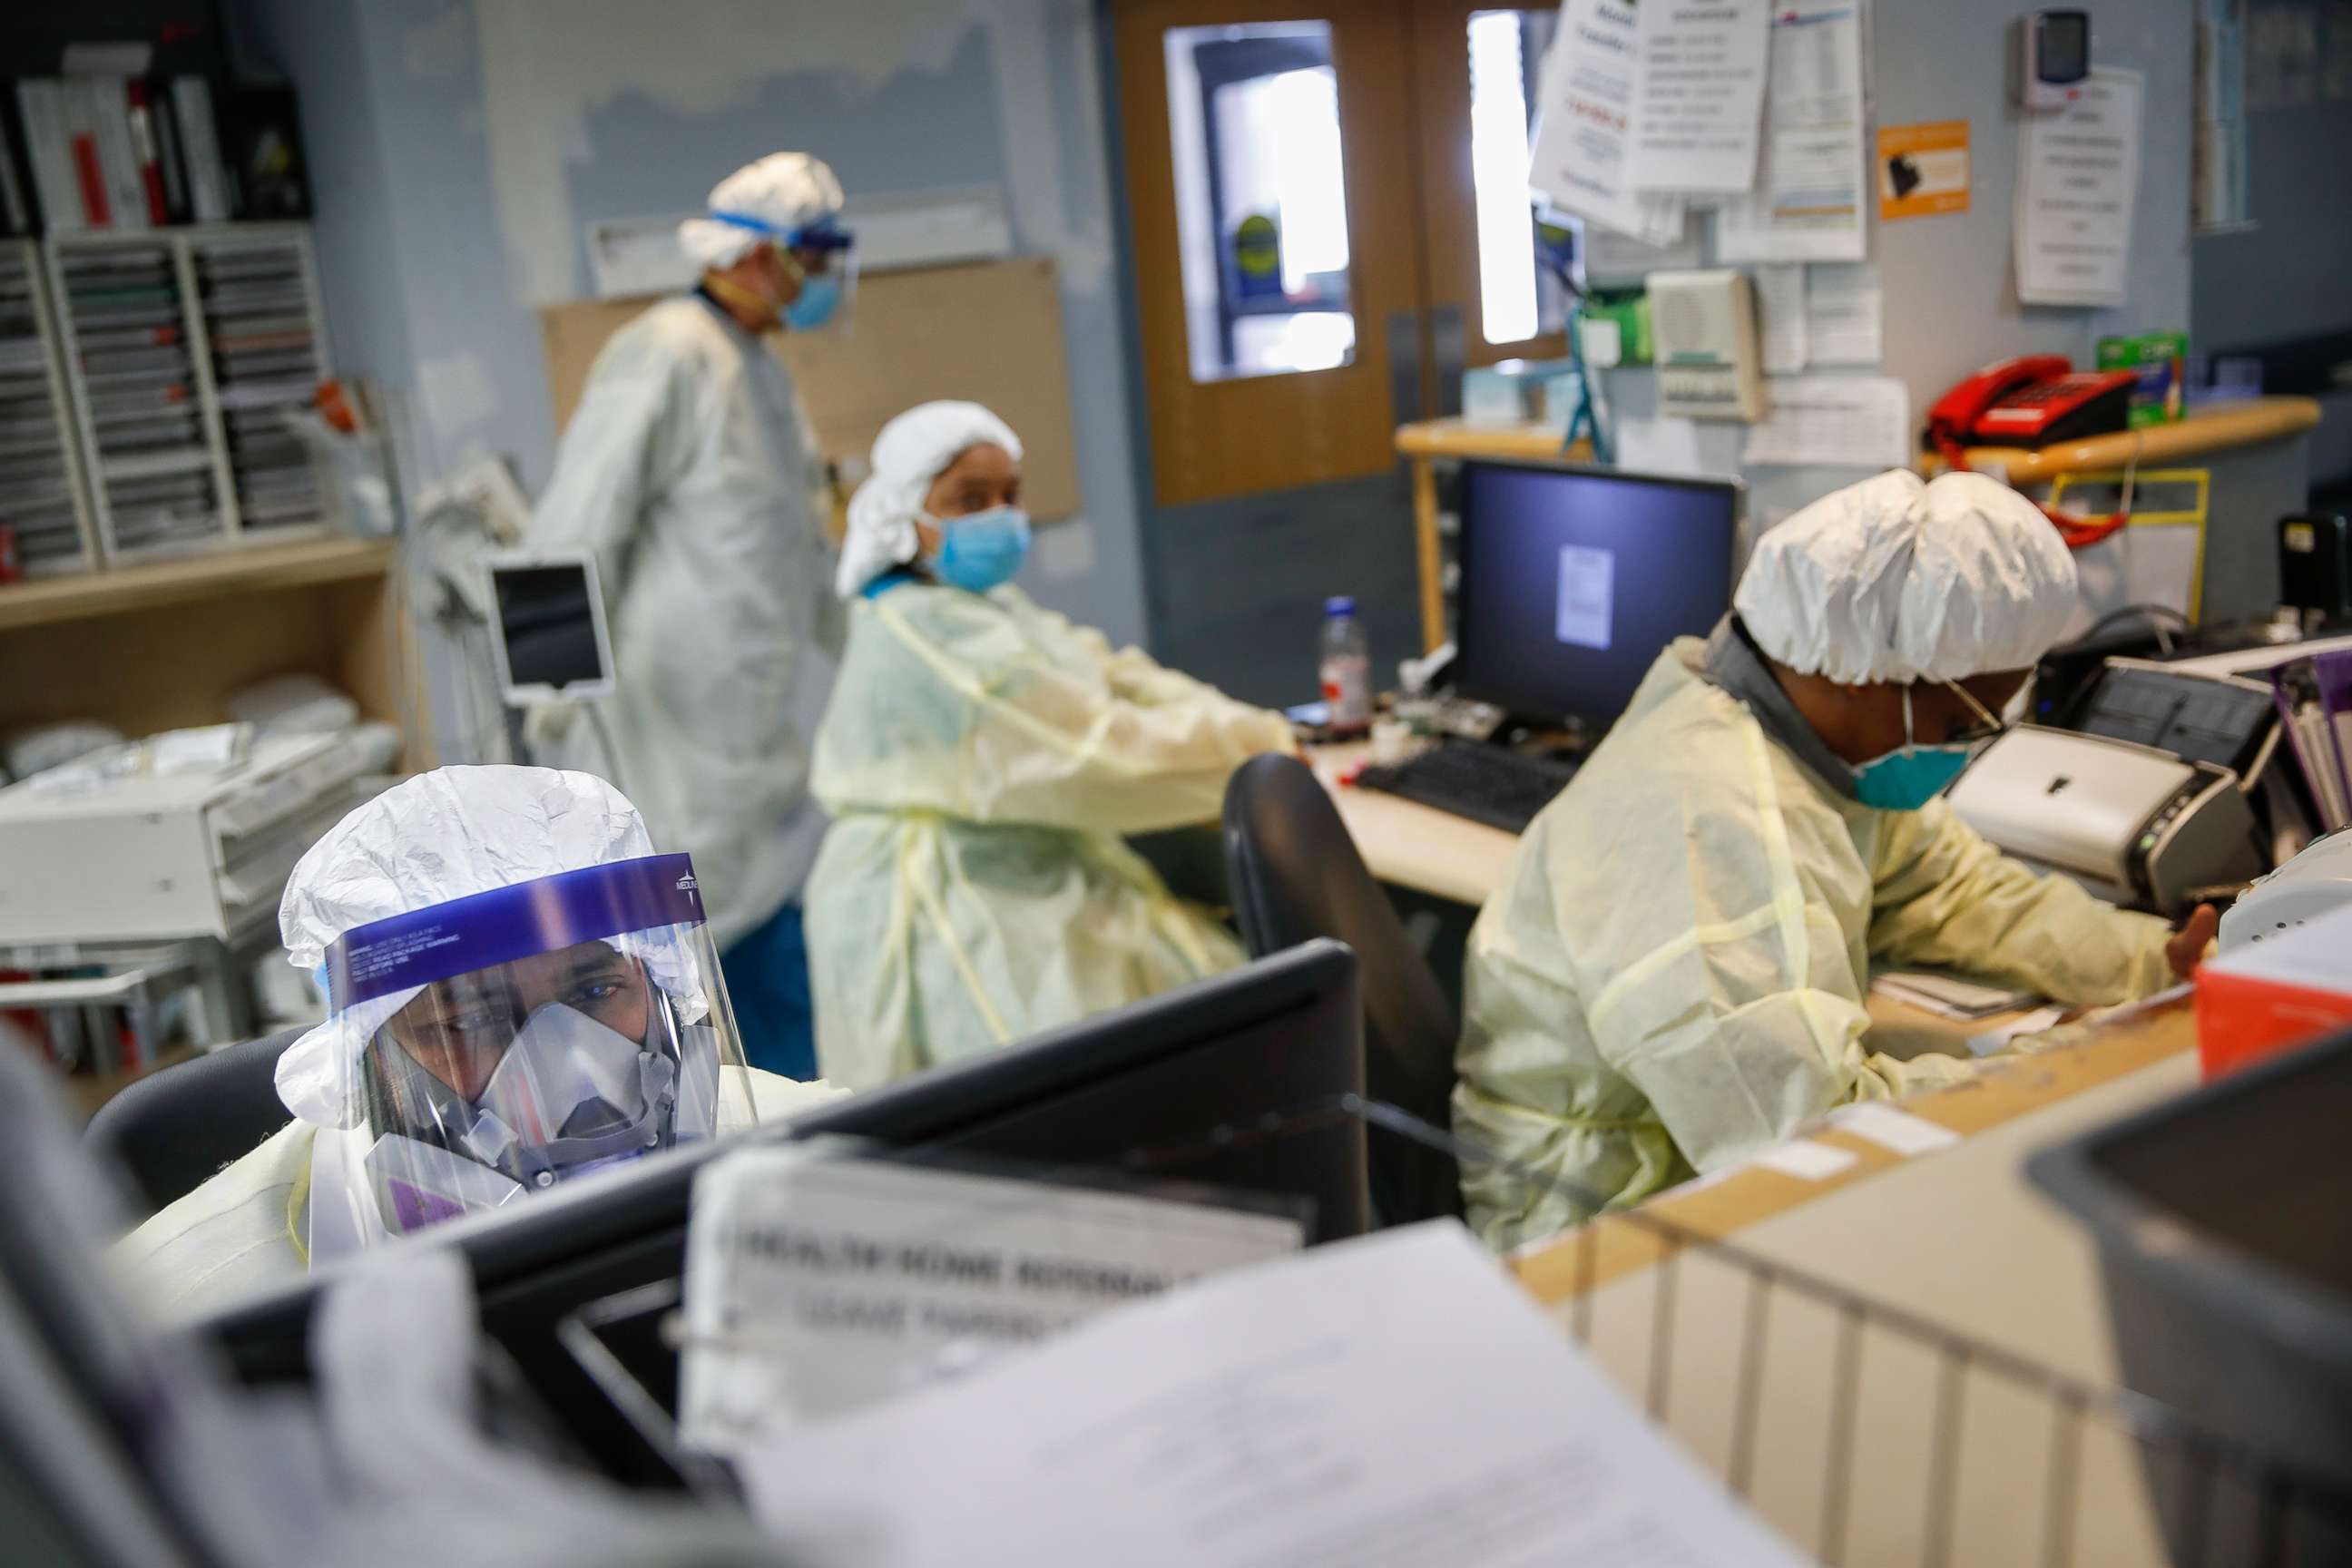 PHOTO: Emergency room doctors and nurses wear personal protective equipment while manning desks due to COVID-19 concerns at St. Joseph's Hospital, April 20, 2020, in Yonkers, N.Y.